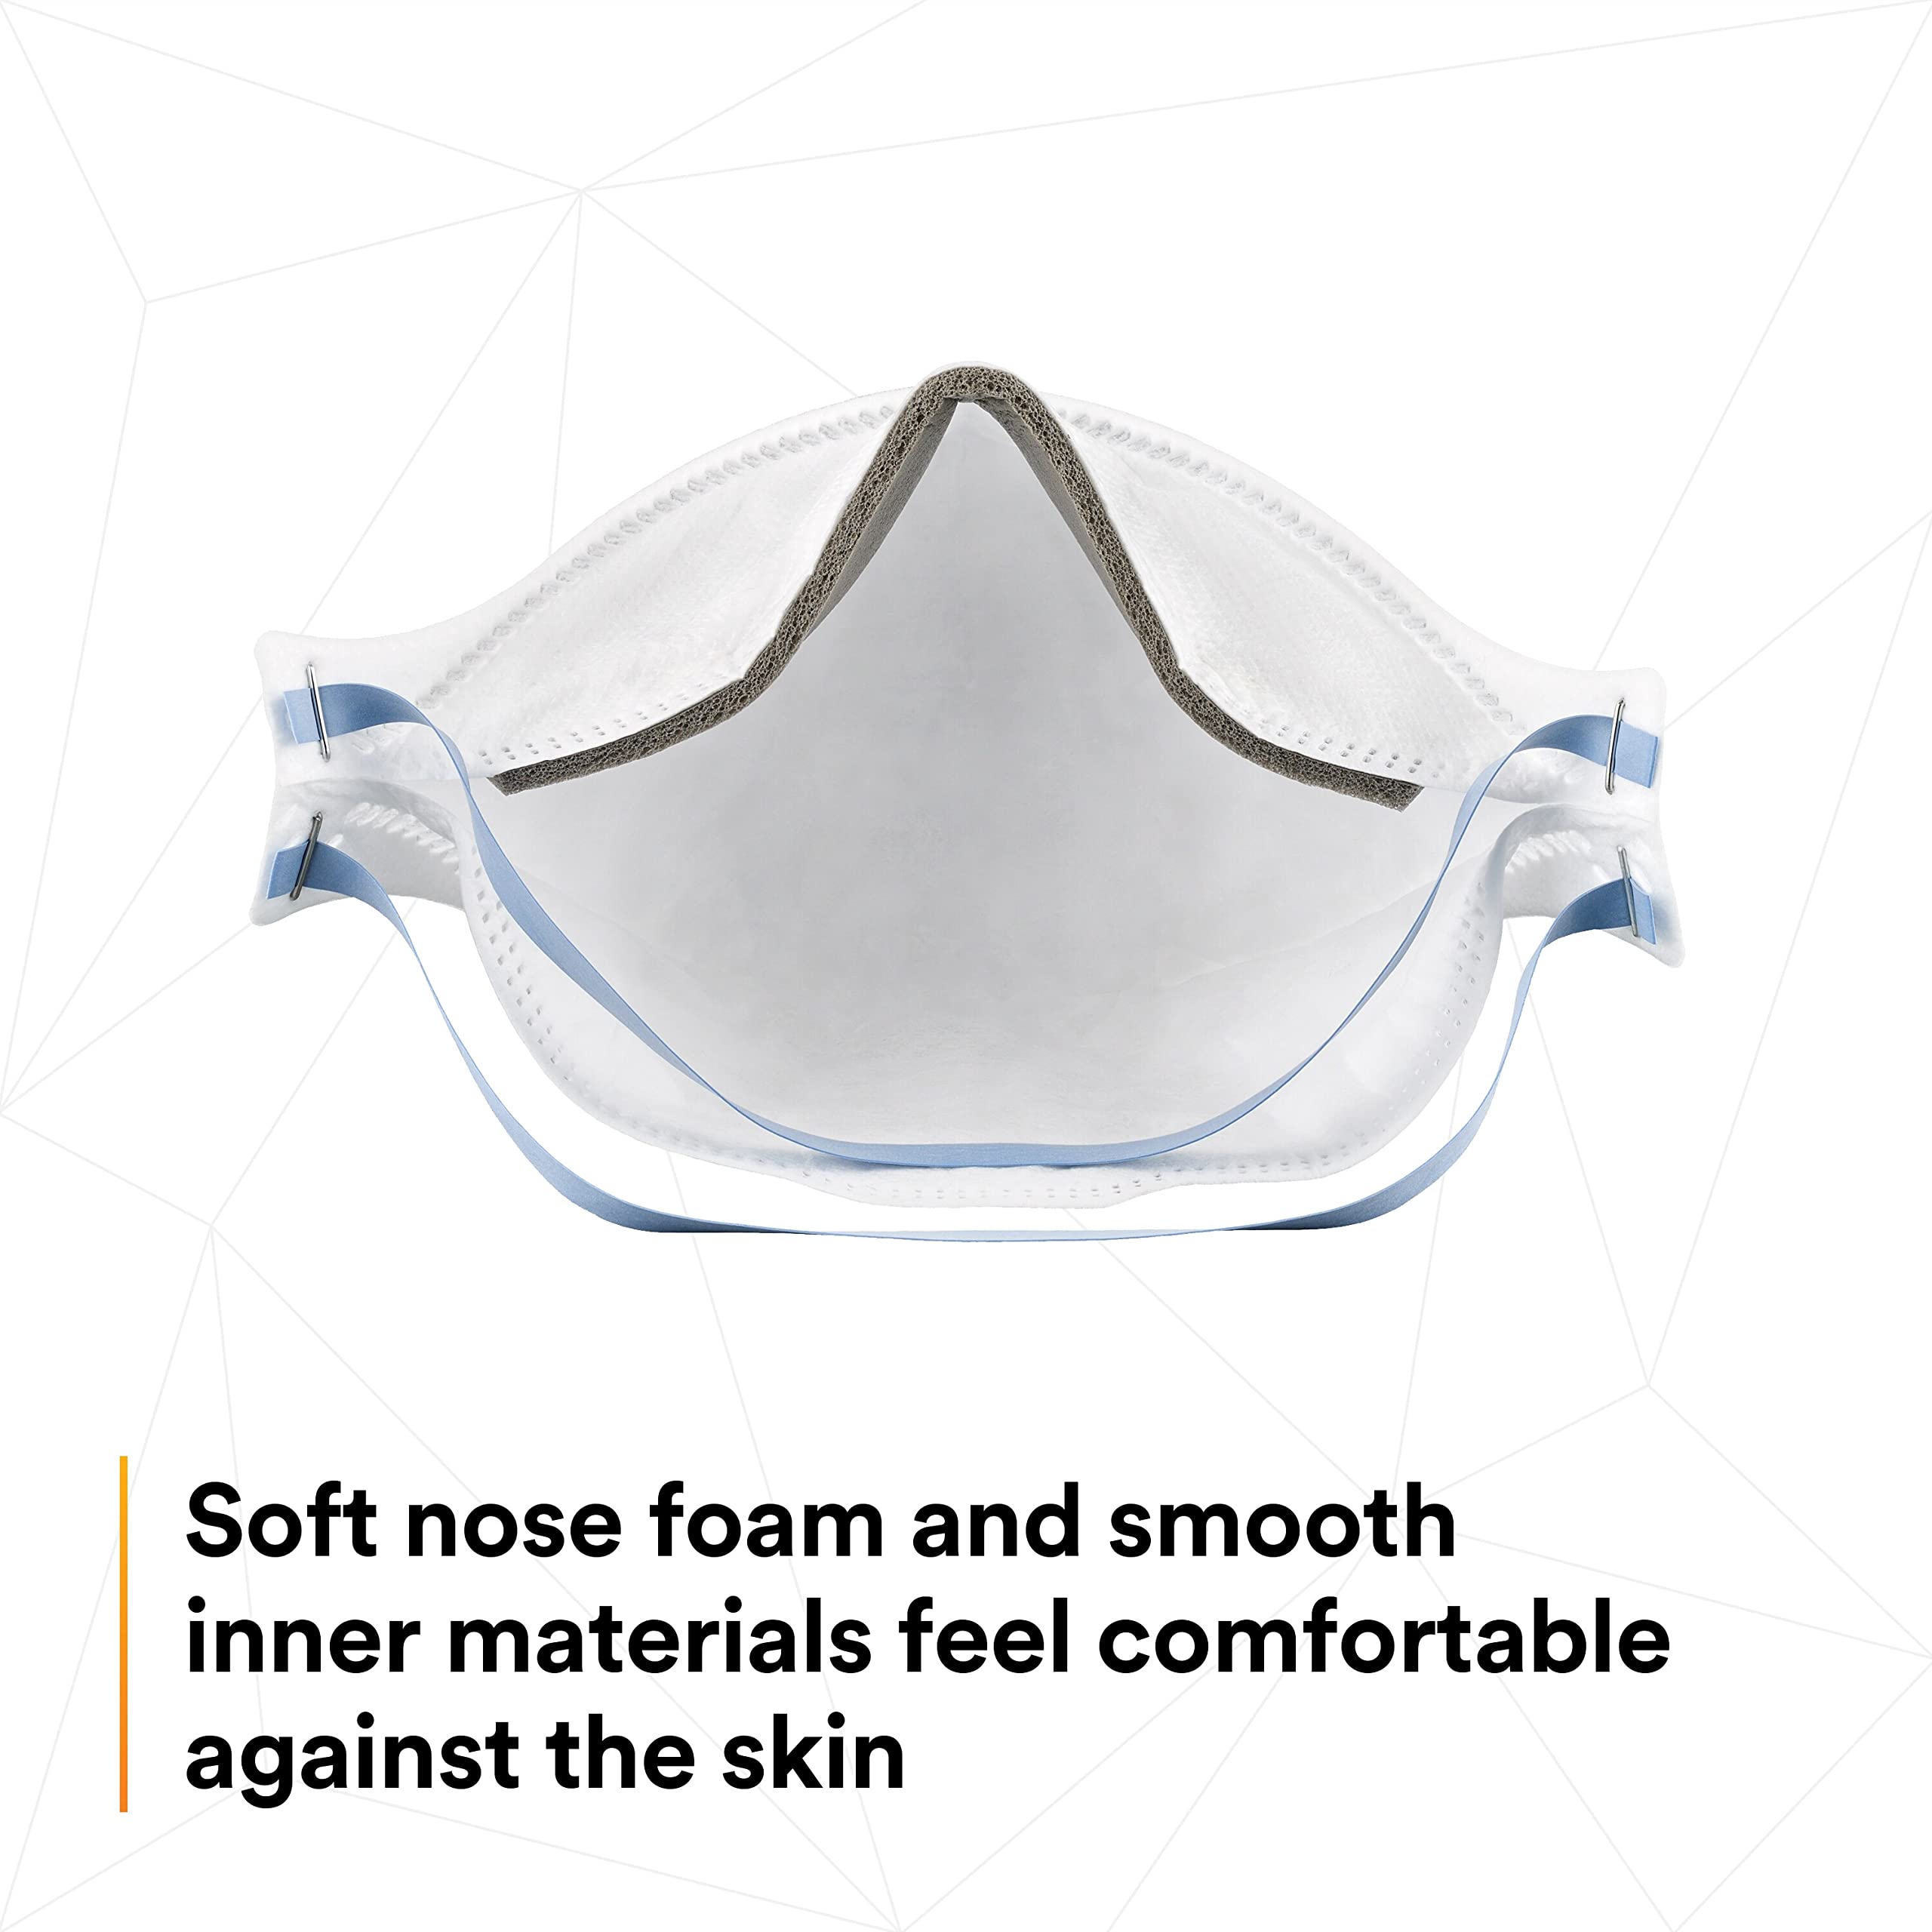 3M Aura Particulate Respirator 9205+, N95, Pack of 440 Disposable Respirators, Individually Wrapped, 3 Panel Flat Fold Design Allows for Facial Movements, Comfortable, NIOSH Approved